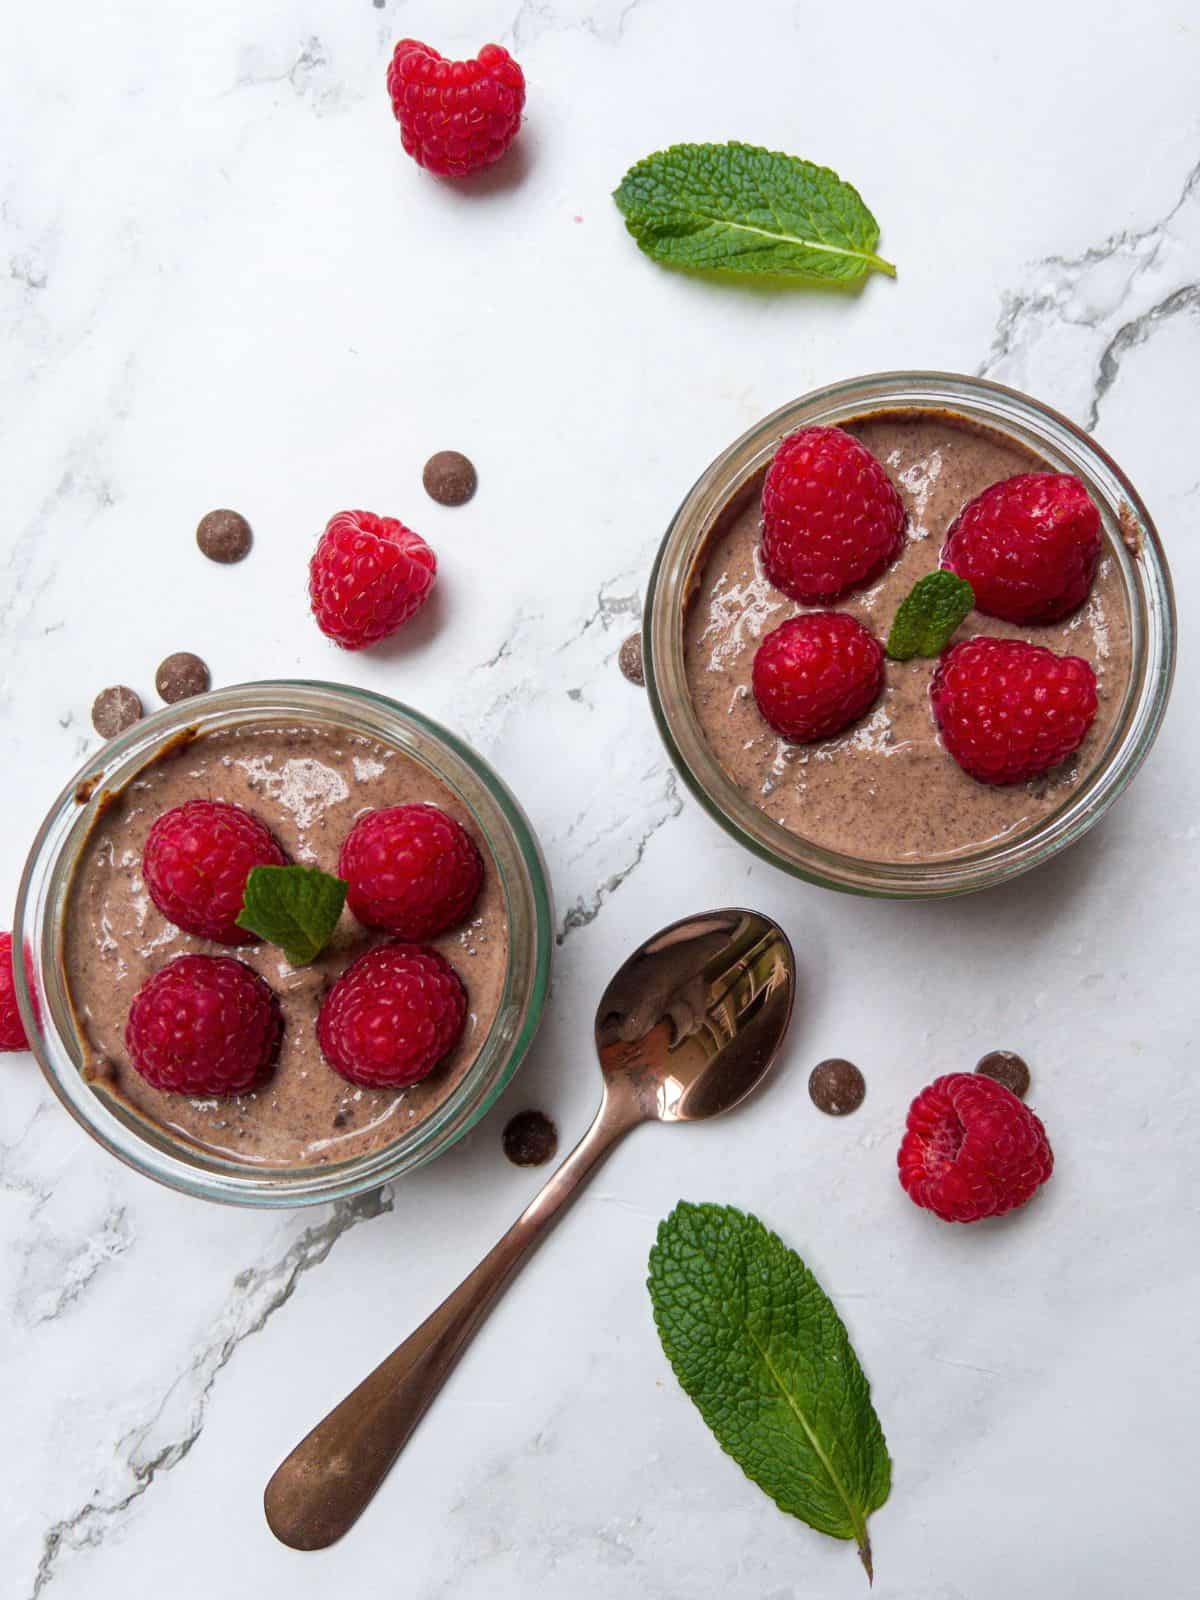 Vegan chocolate mousse with raspberries and mint.